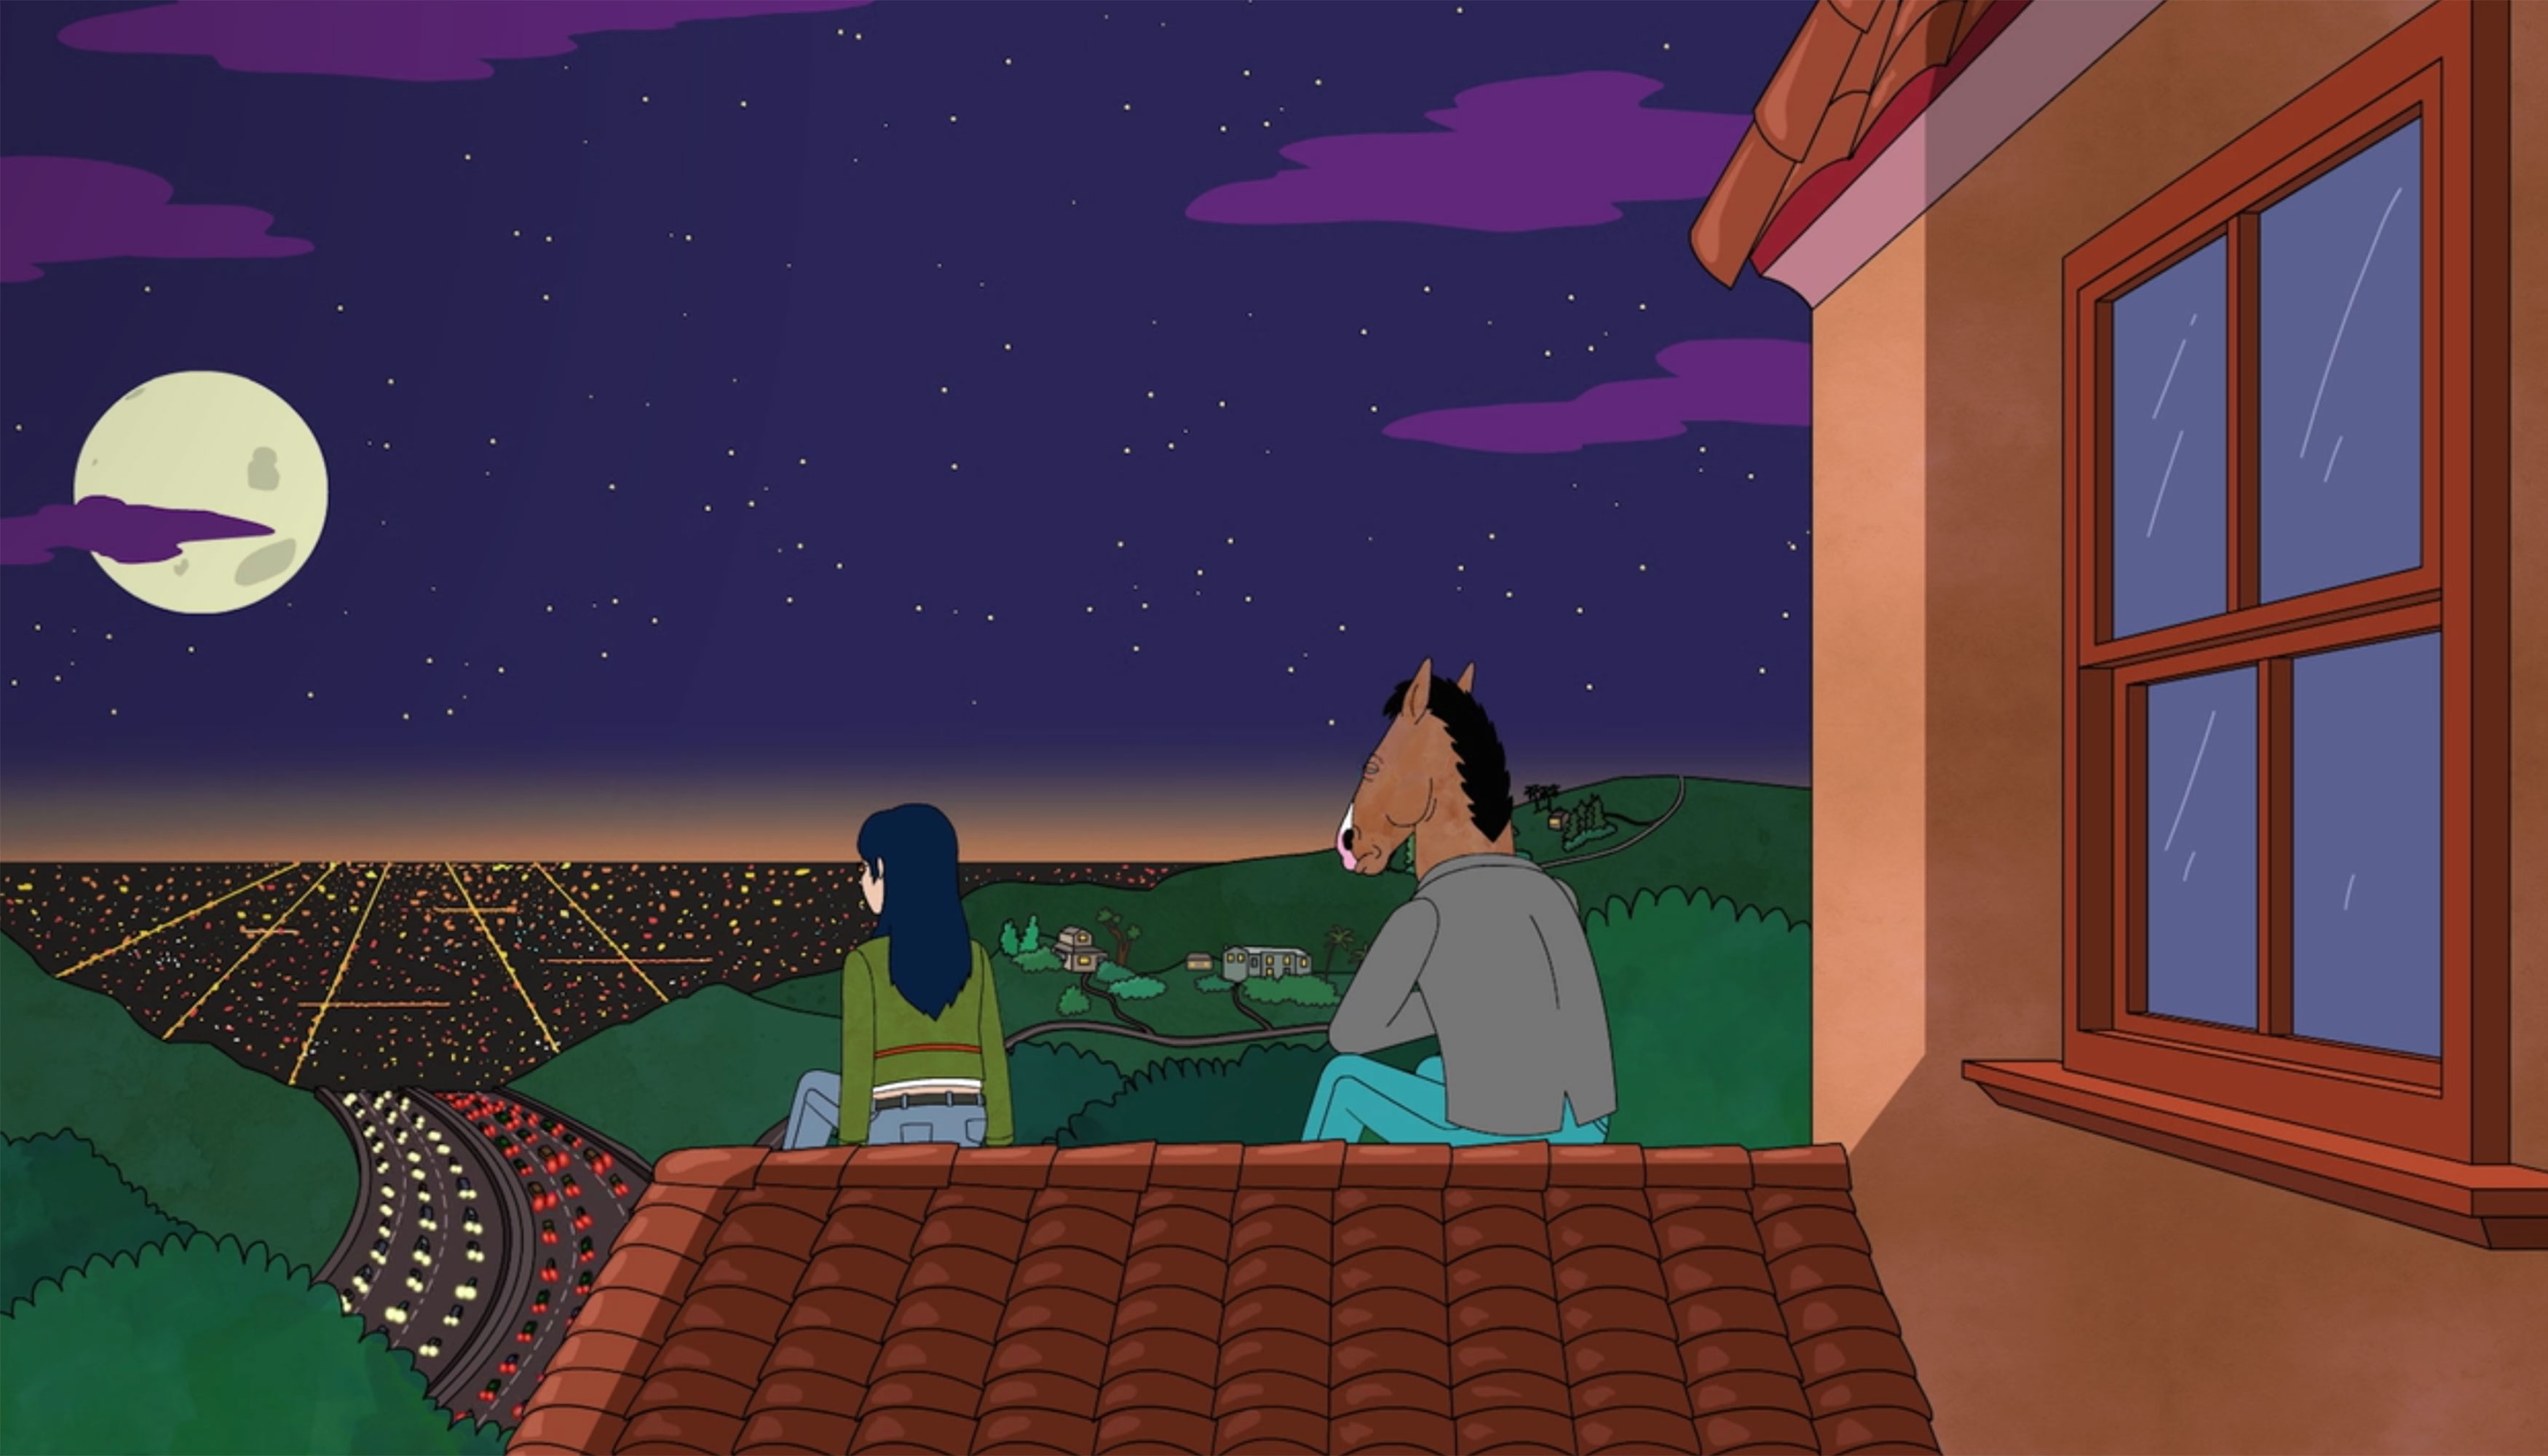 A still from the Netflix series Bojack Horseman. Bojack and friend are sitting on a roof of a house overlooking the cityscape of Los Angeles. It is night and there is a full moon and stars in the sky.